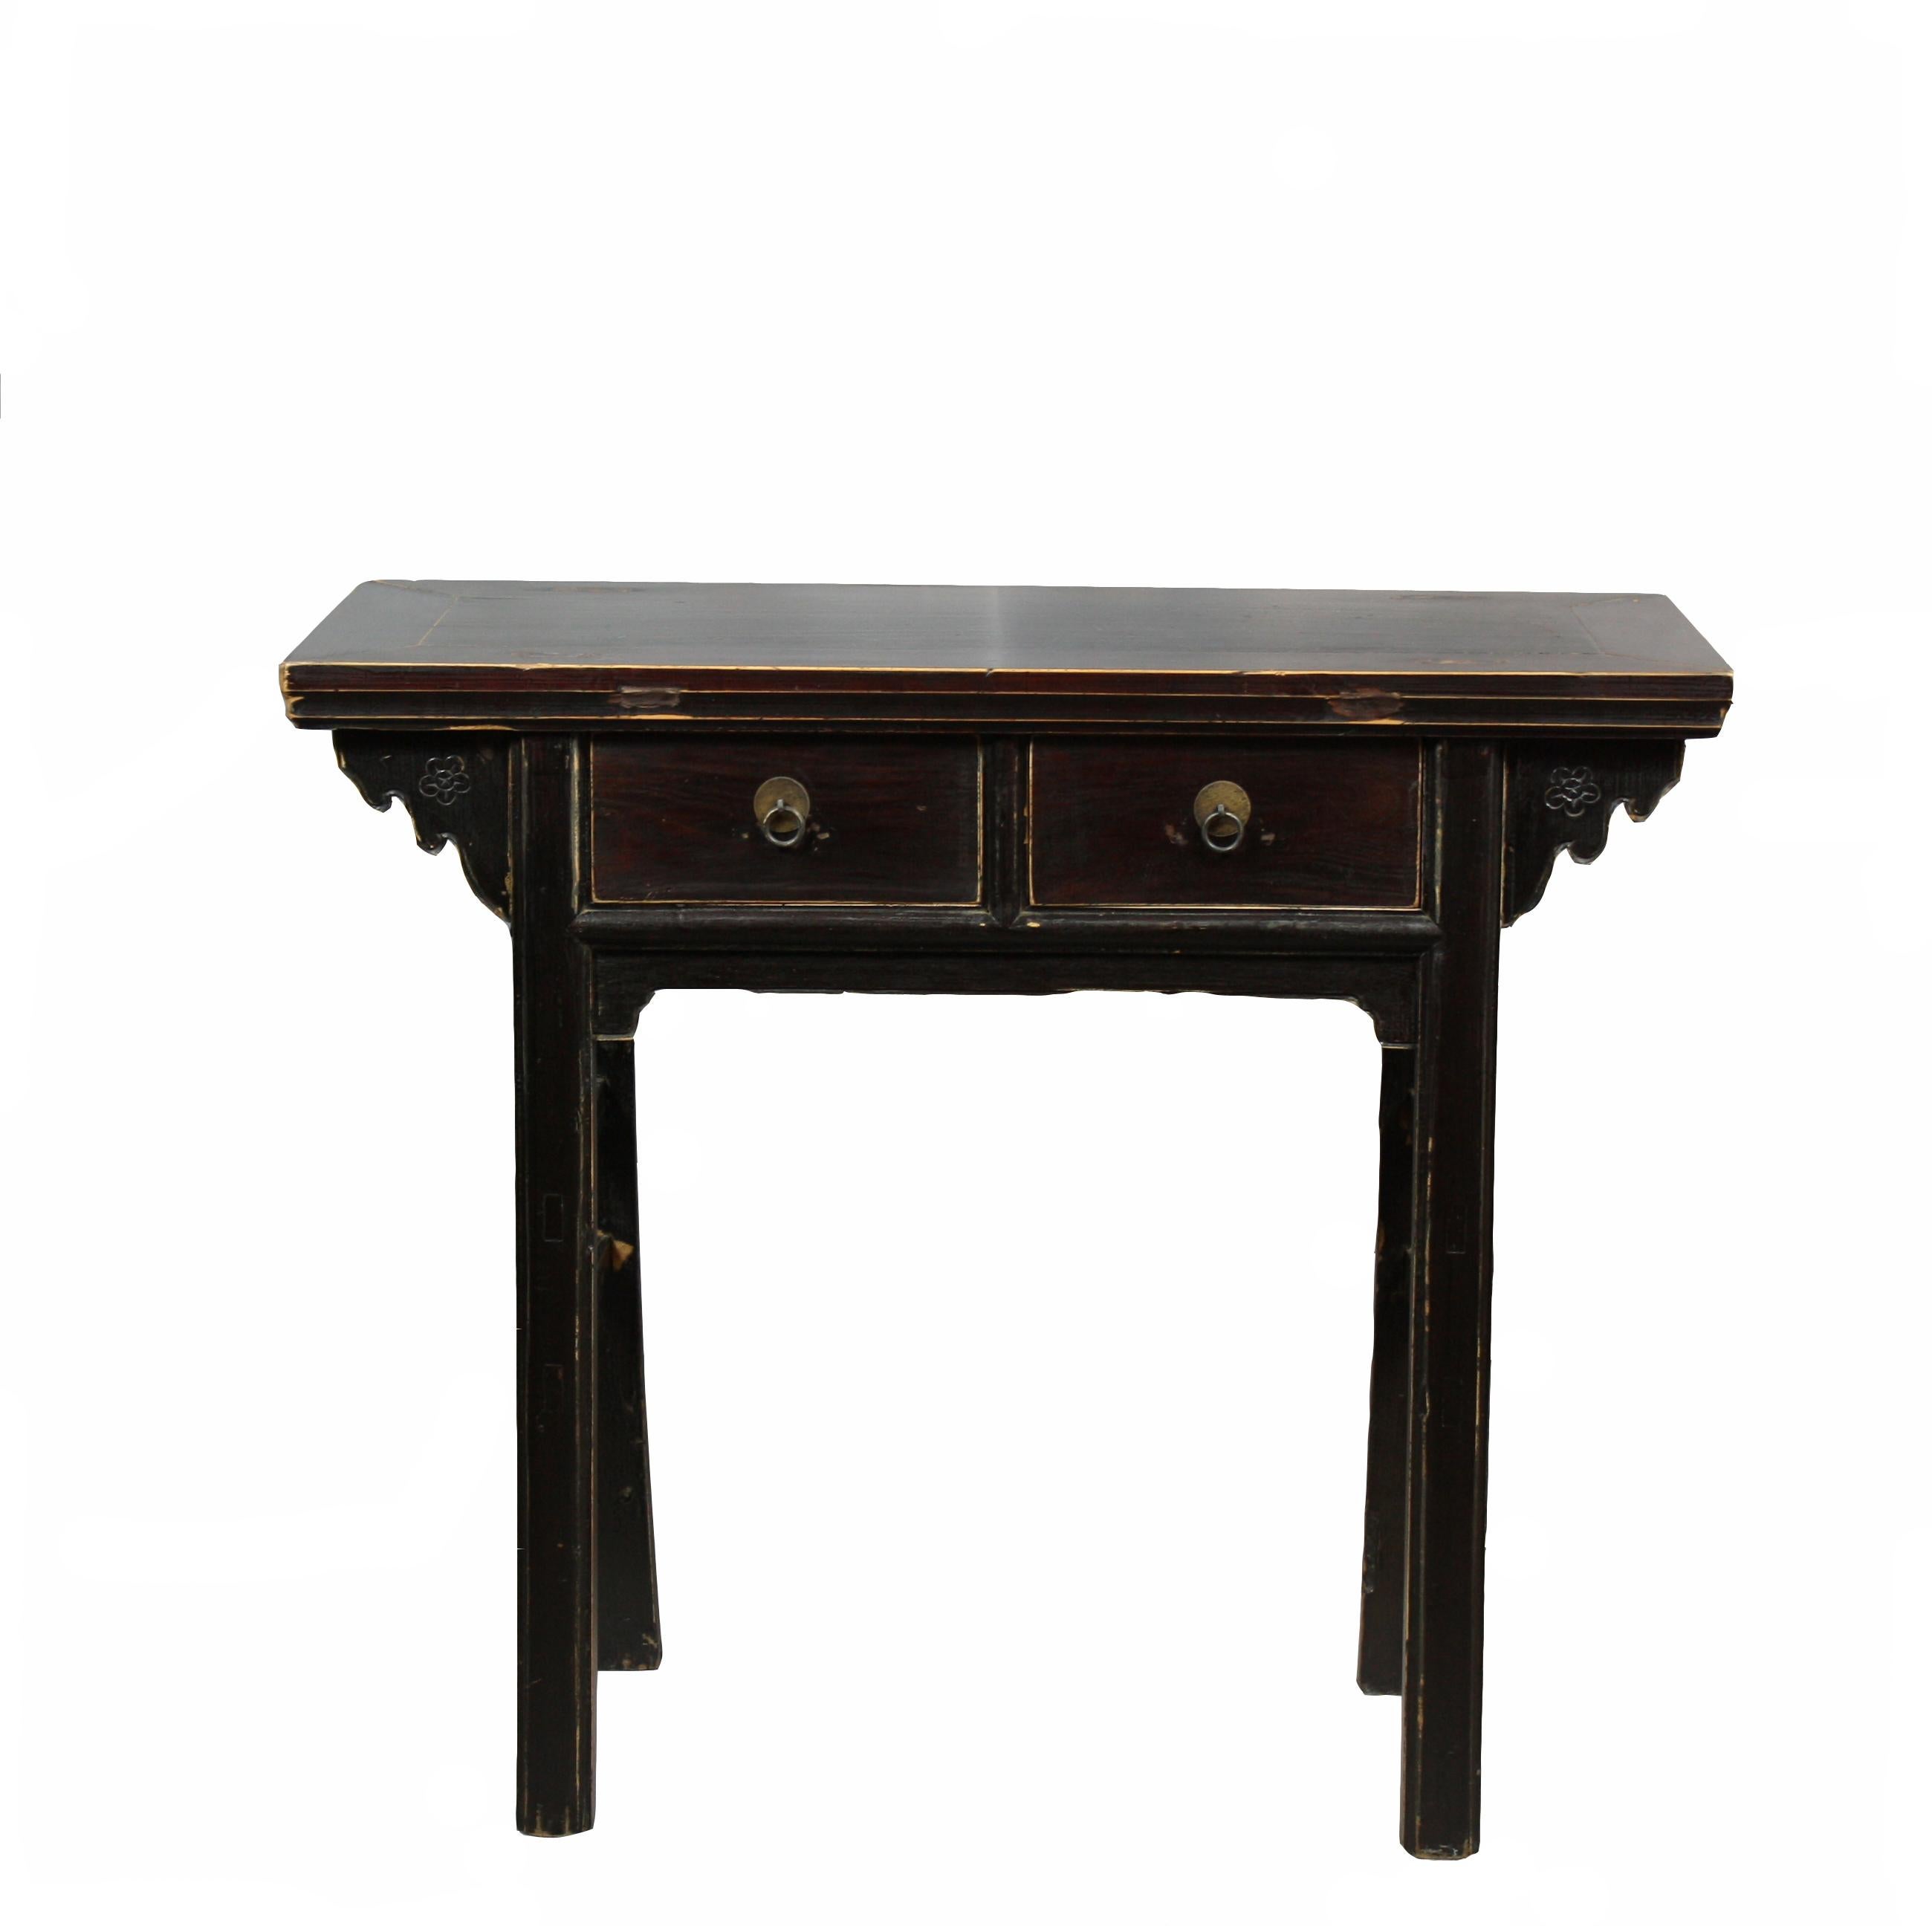 Straight legs, aged black lacquer paint with red hue, and cloud shaped carving on the top of two sides makes this lovely table a perfect antique Asia accent table in the living room, hall way, or a small blanket space.